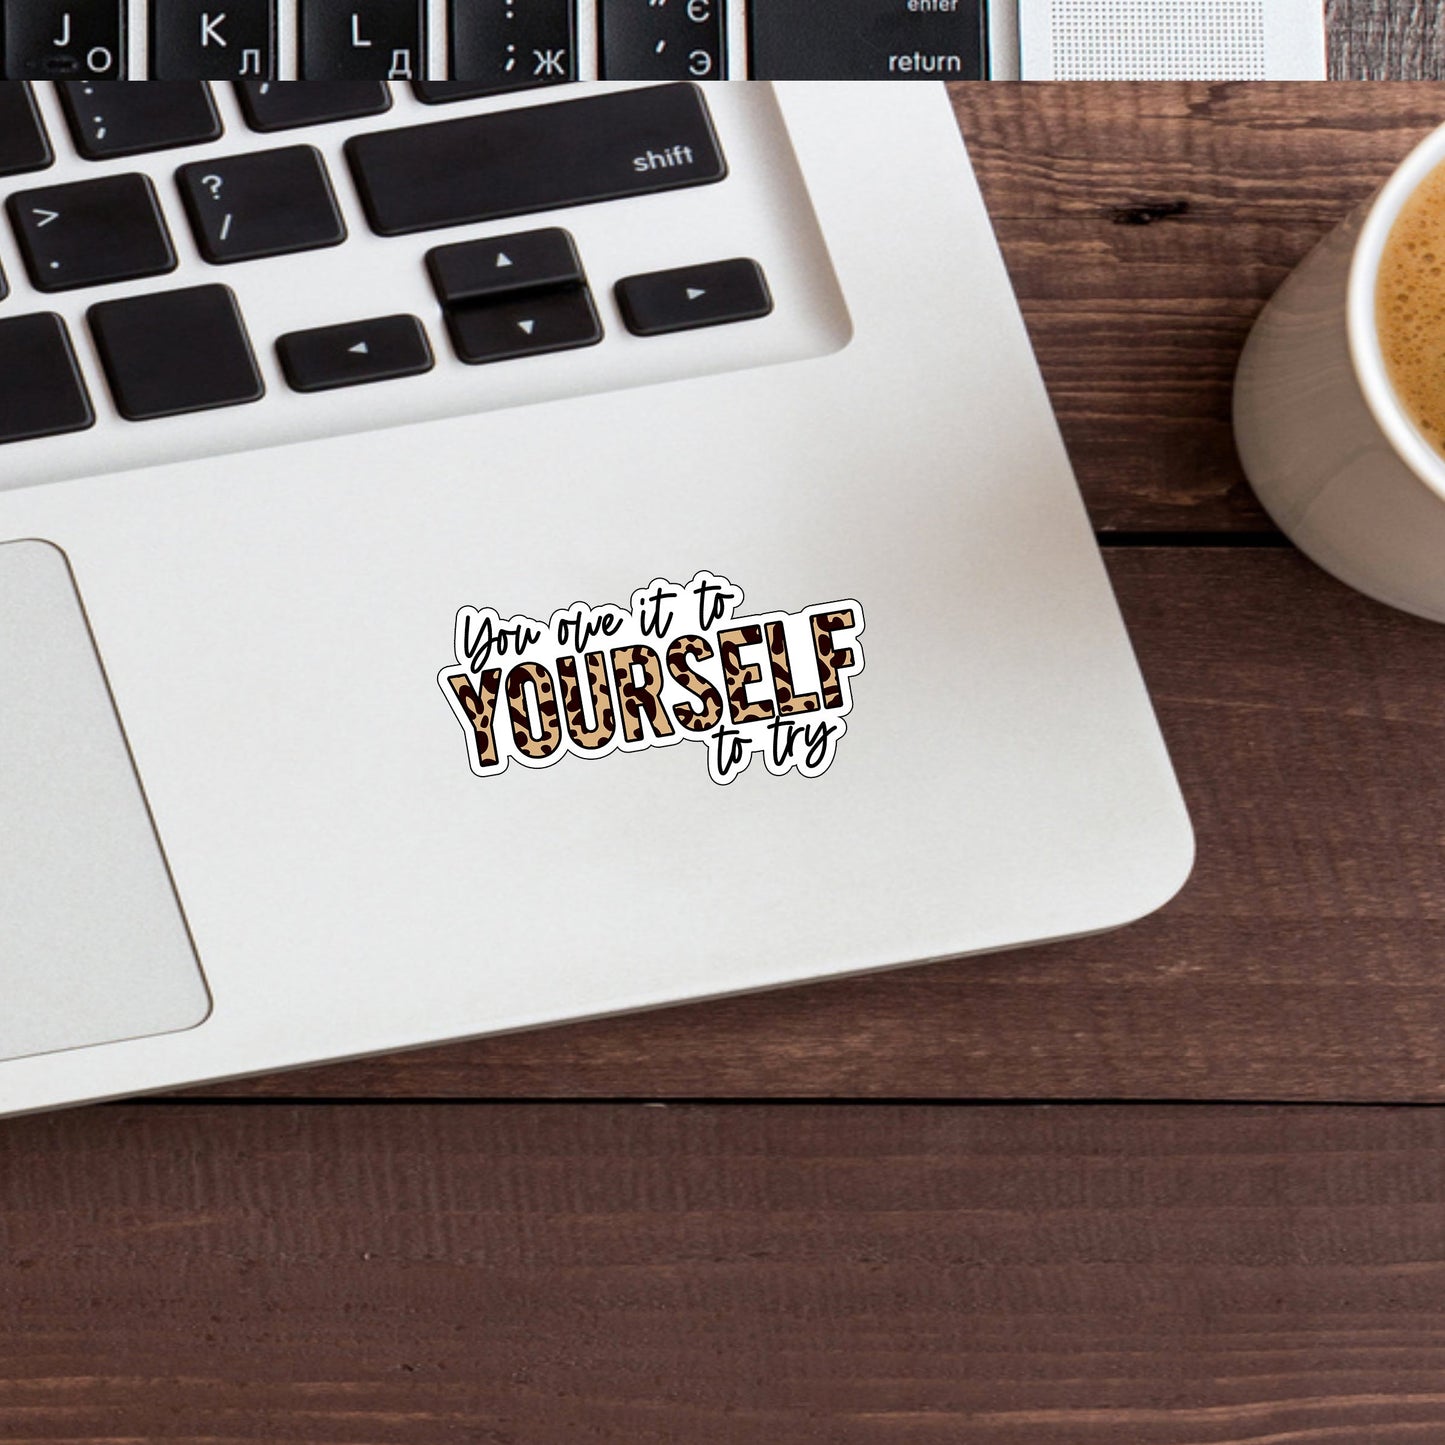 You owe it to yourself to try PRINT  Sticker,  Vinyl sticker, laptop sticker, Tablet sticker